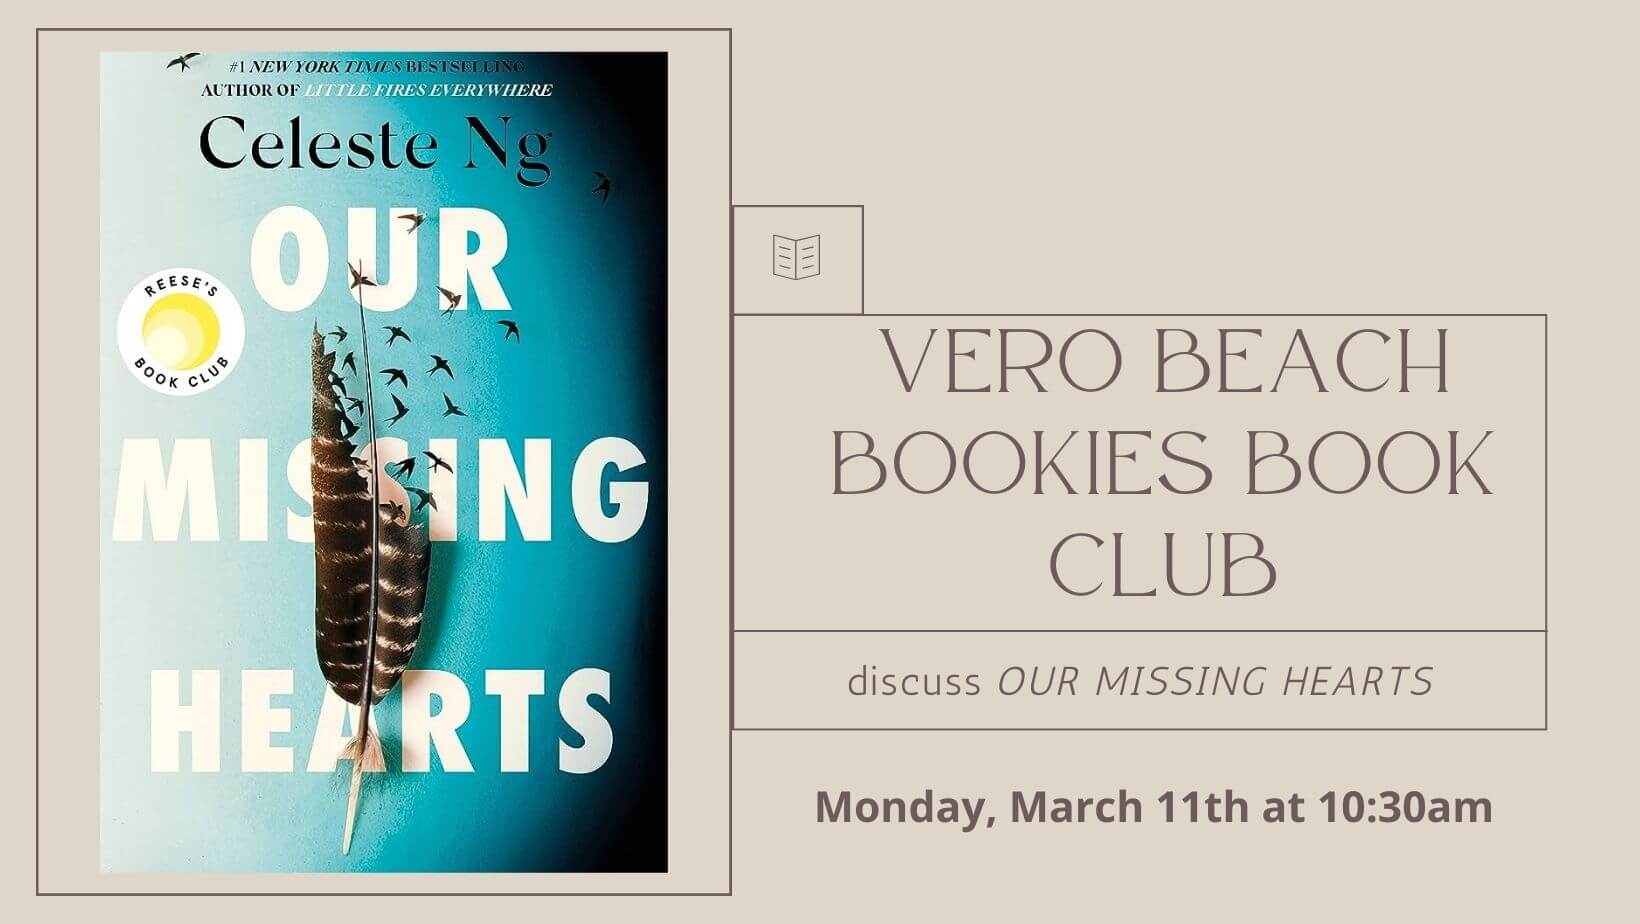 The Vero Beach Bookies discuss Our Missing Hearts by Celeste NG